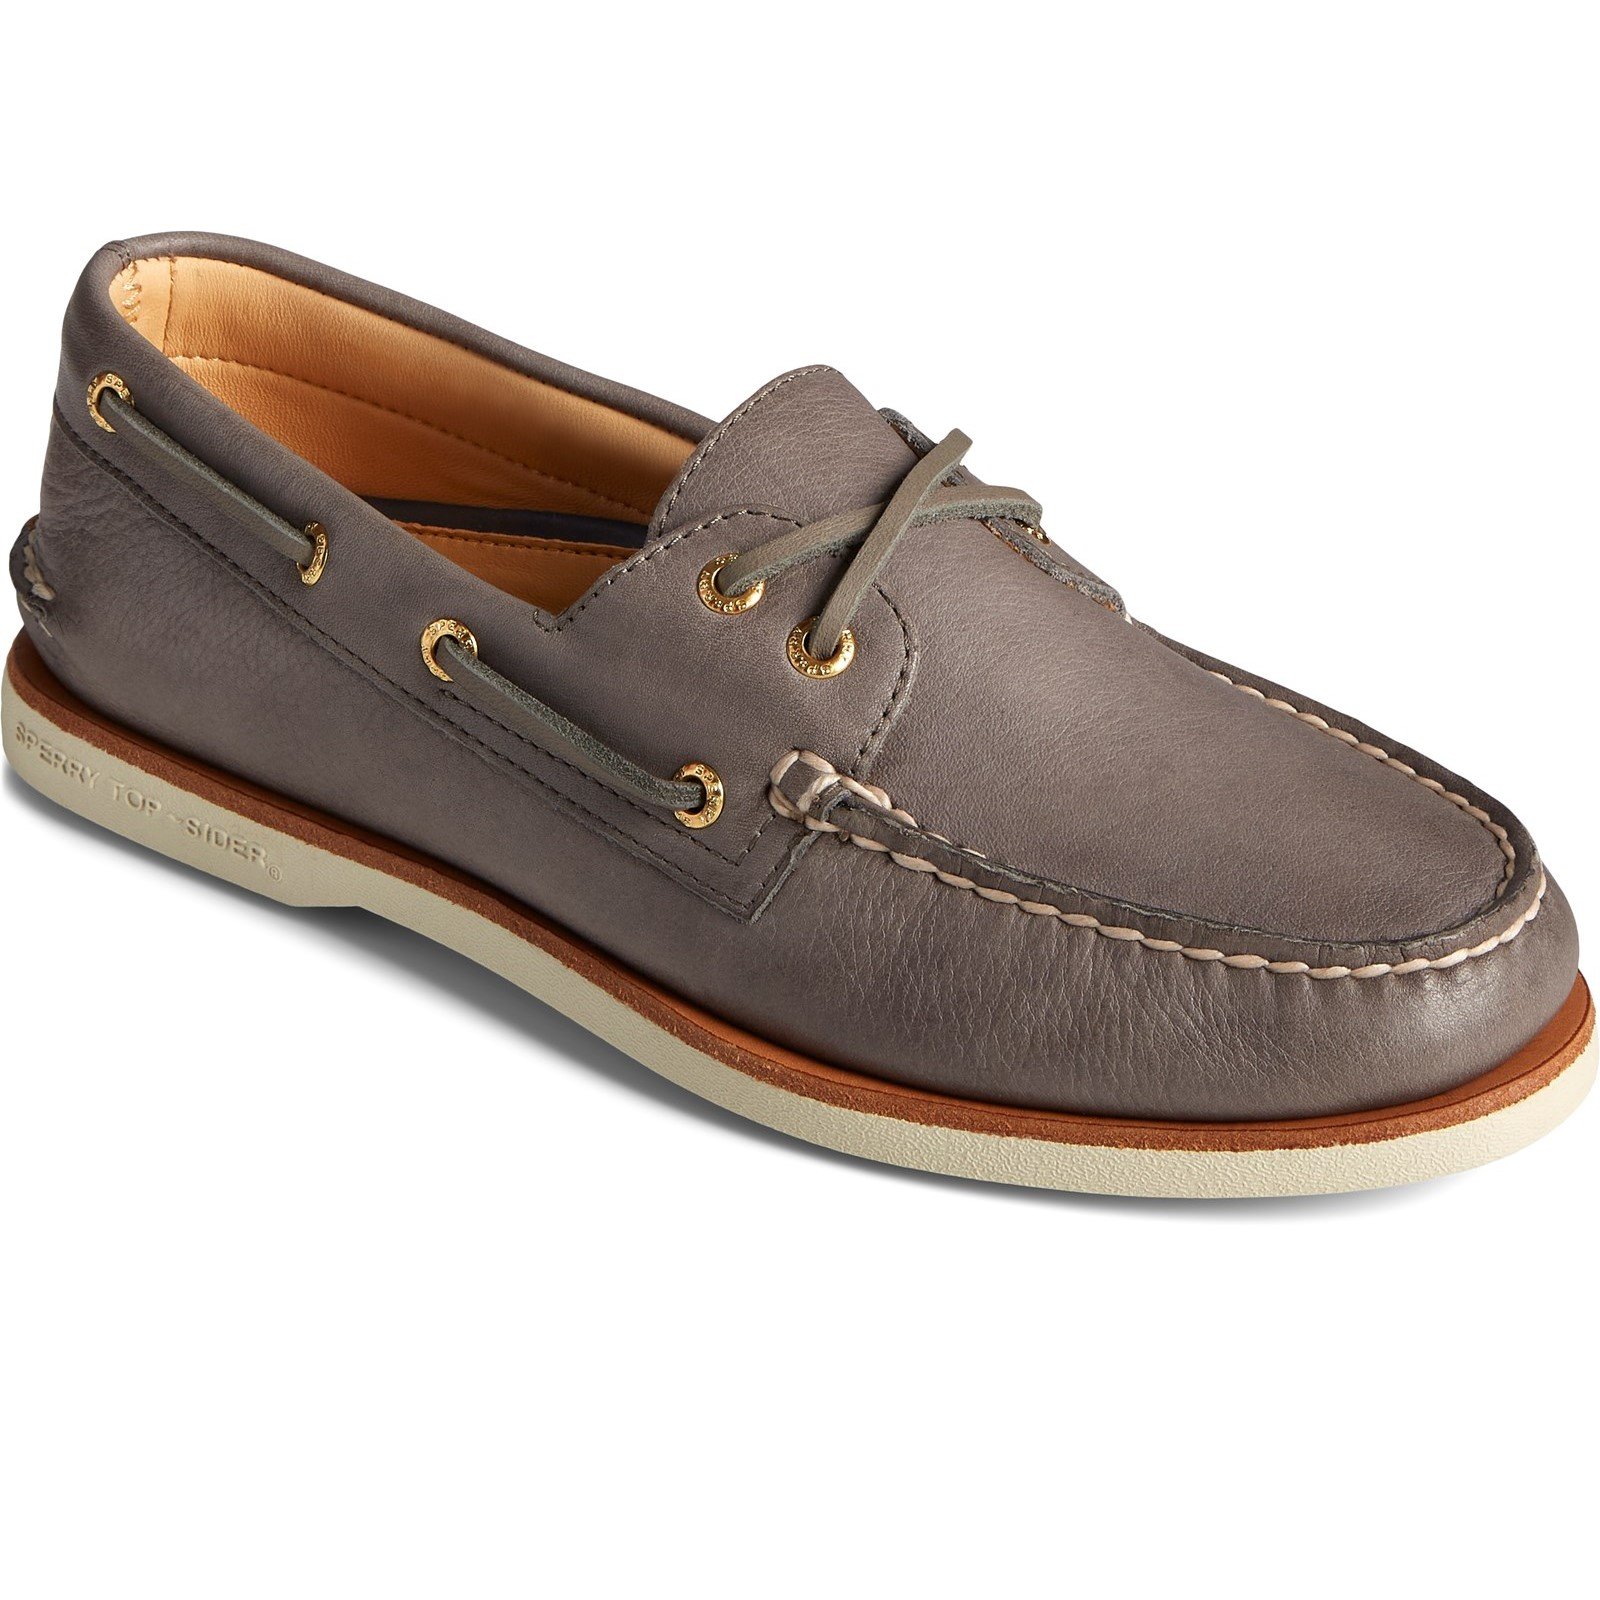 Sperry Men's A/O 2-Eye Boat Shoe Various Colours 32926 - Charcoal 7.5